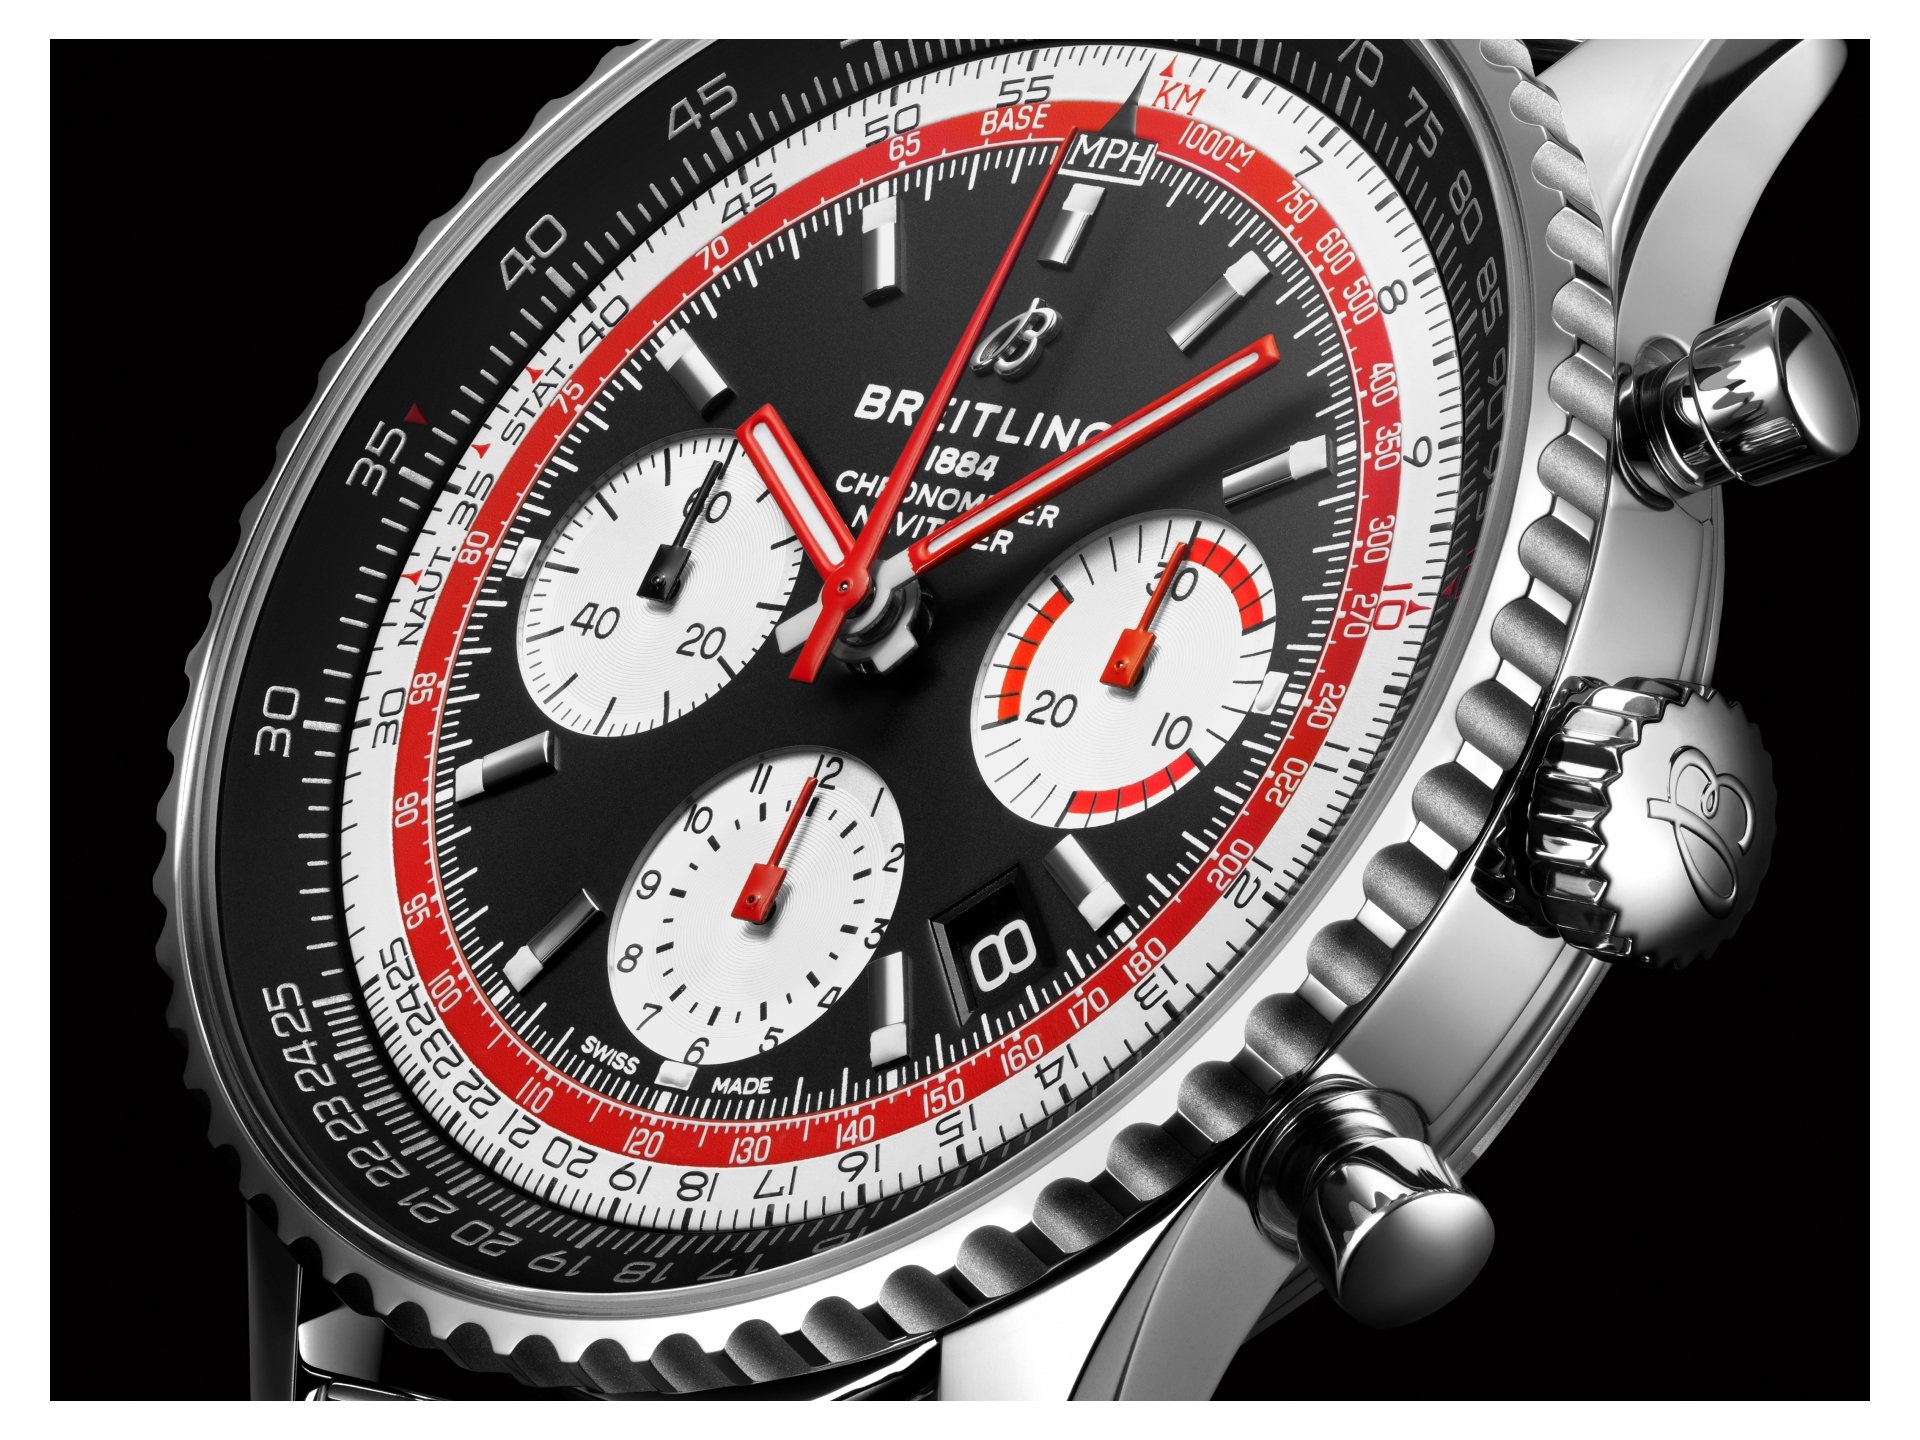 Breitling Replica Watches That Take Paypal